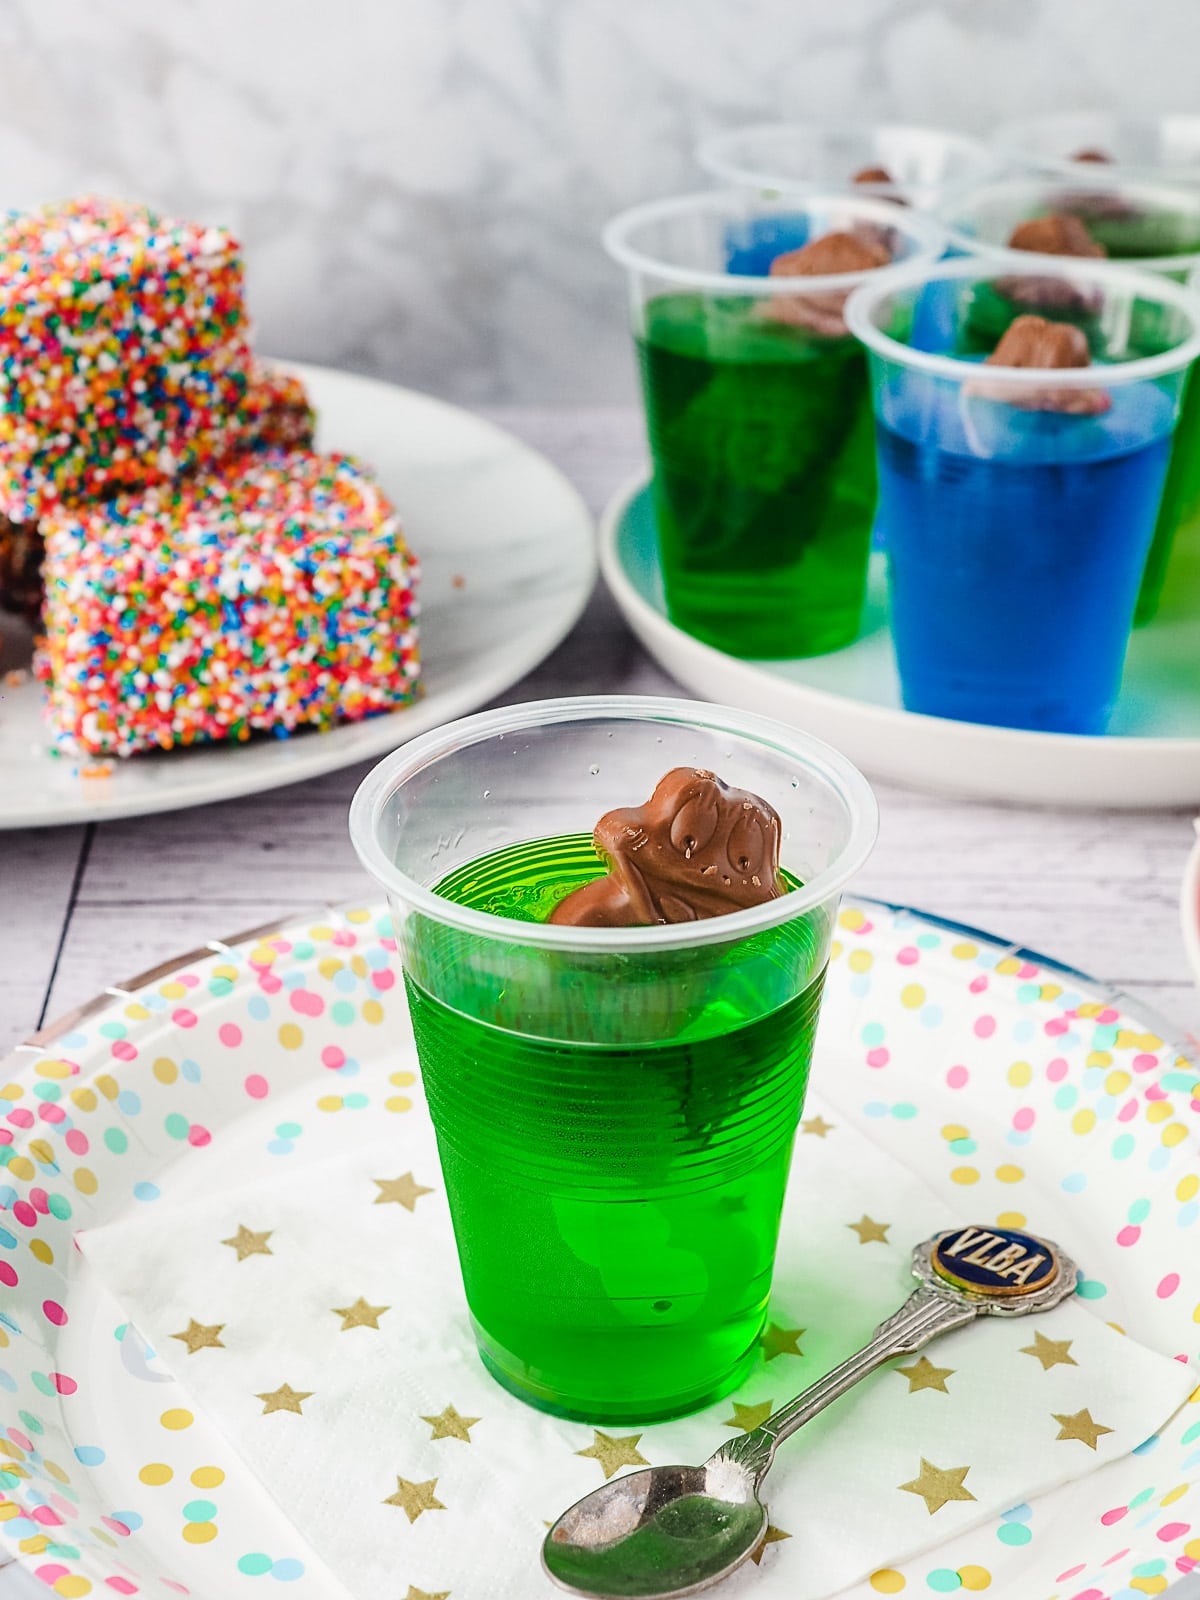 Jelly cup on a party plate with a spoon and party food in the background.